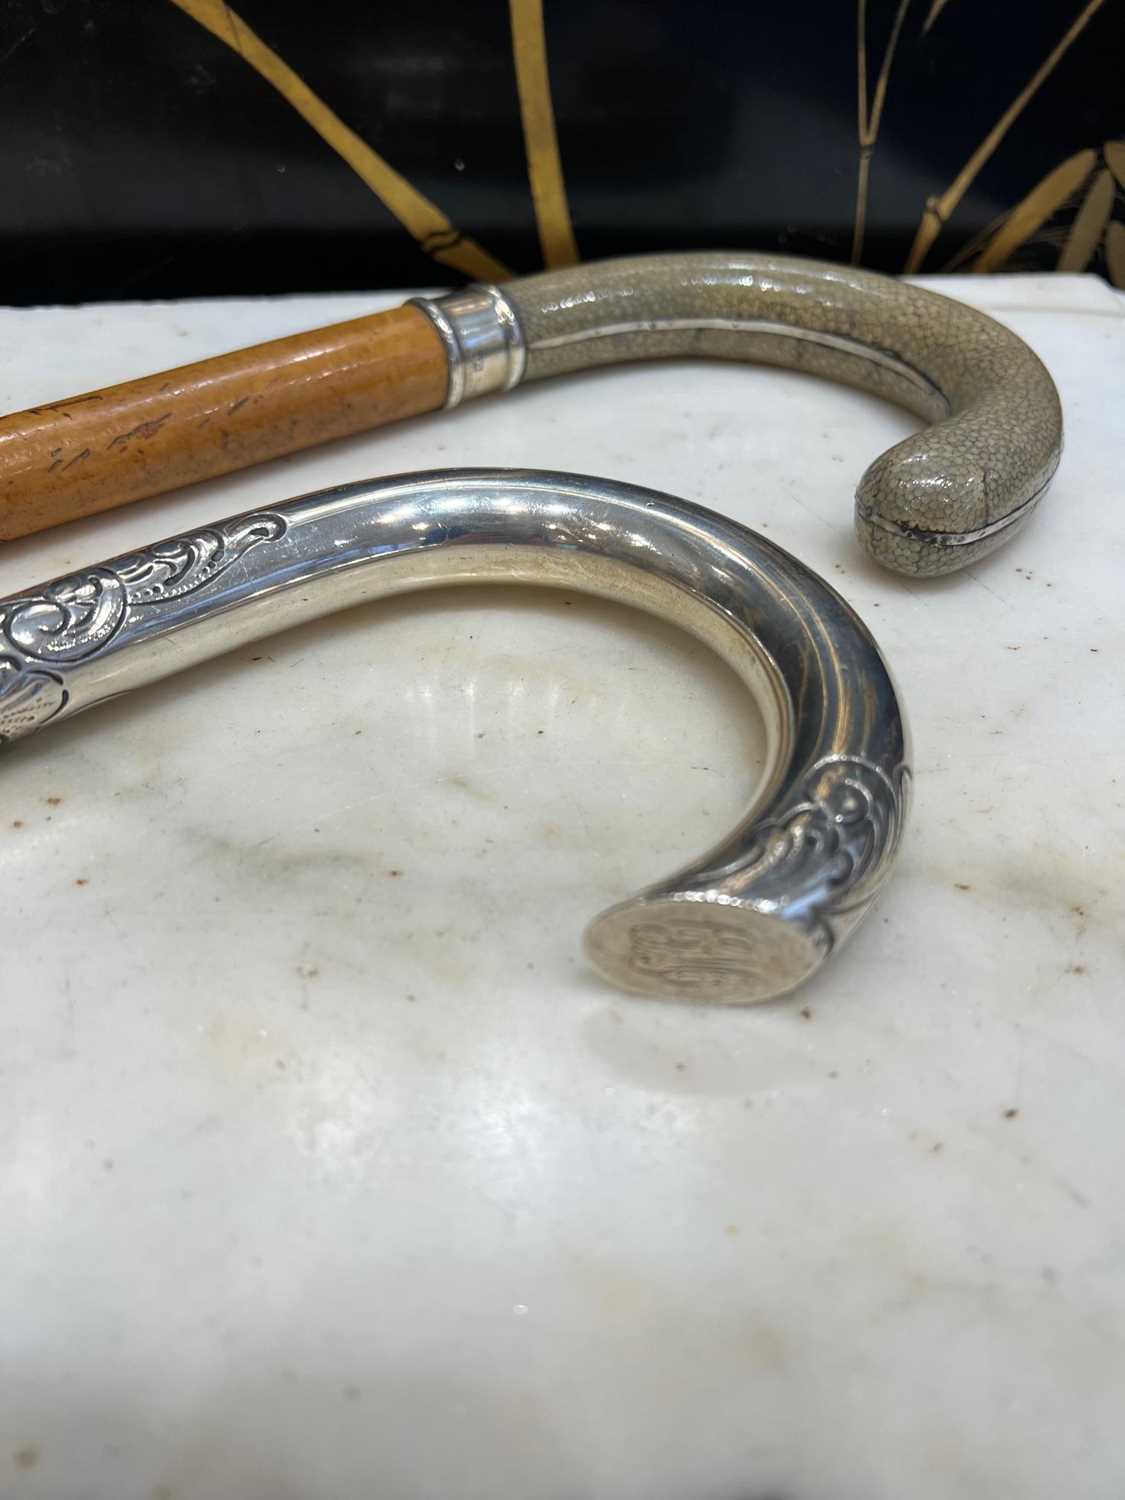 A LATE 19TH / EARLY 20TH CENTURY SHAGREEN AND SILVER HANDLED WALKING CANE - Image 4 of 6